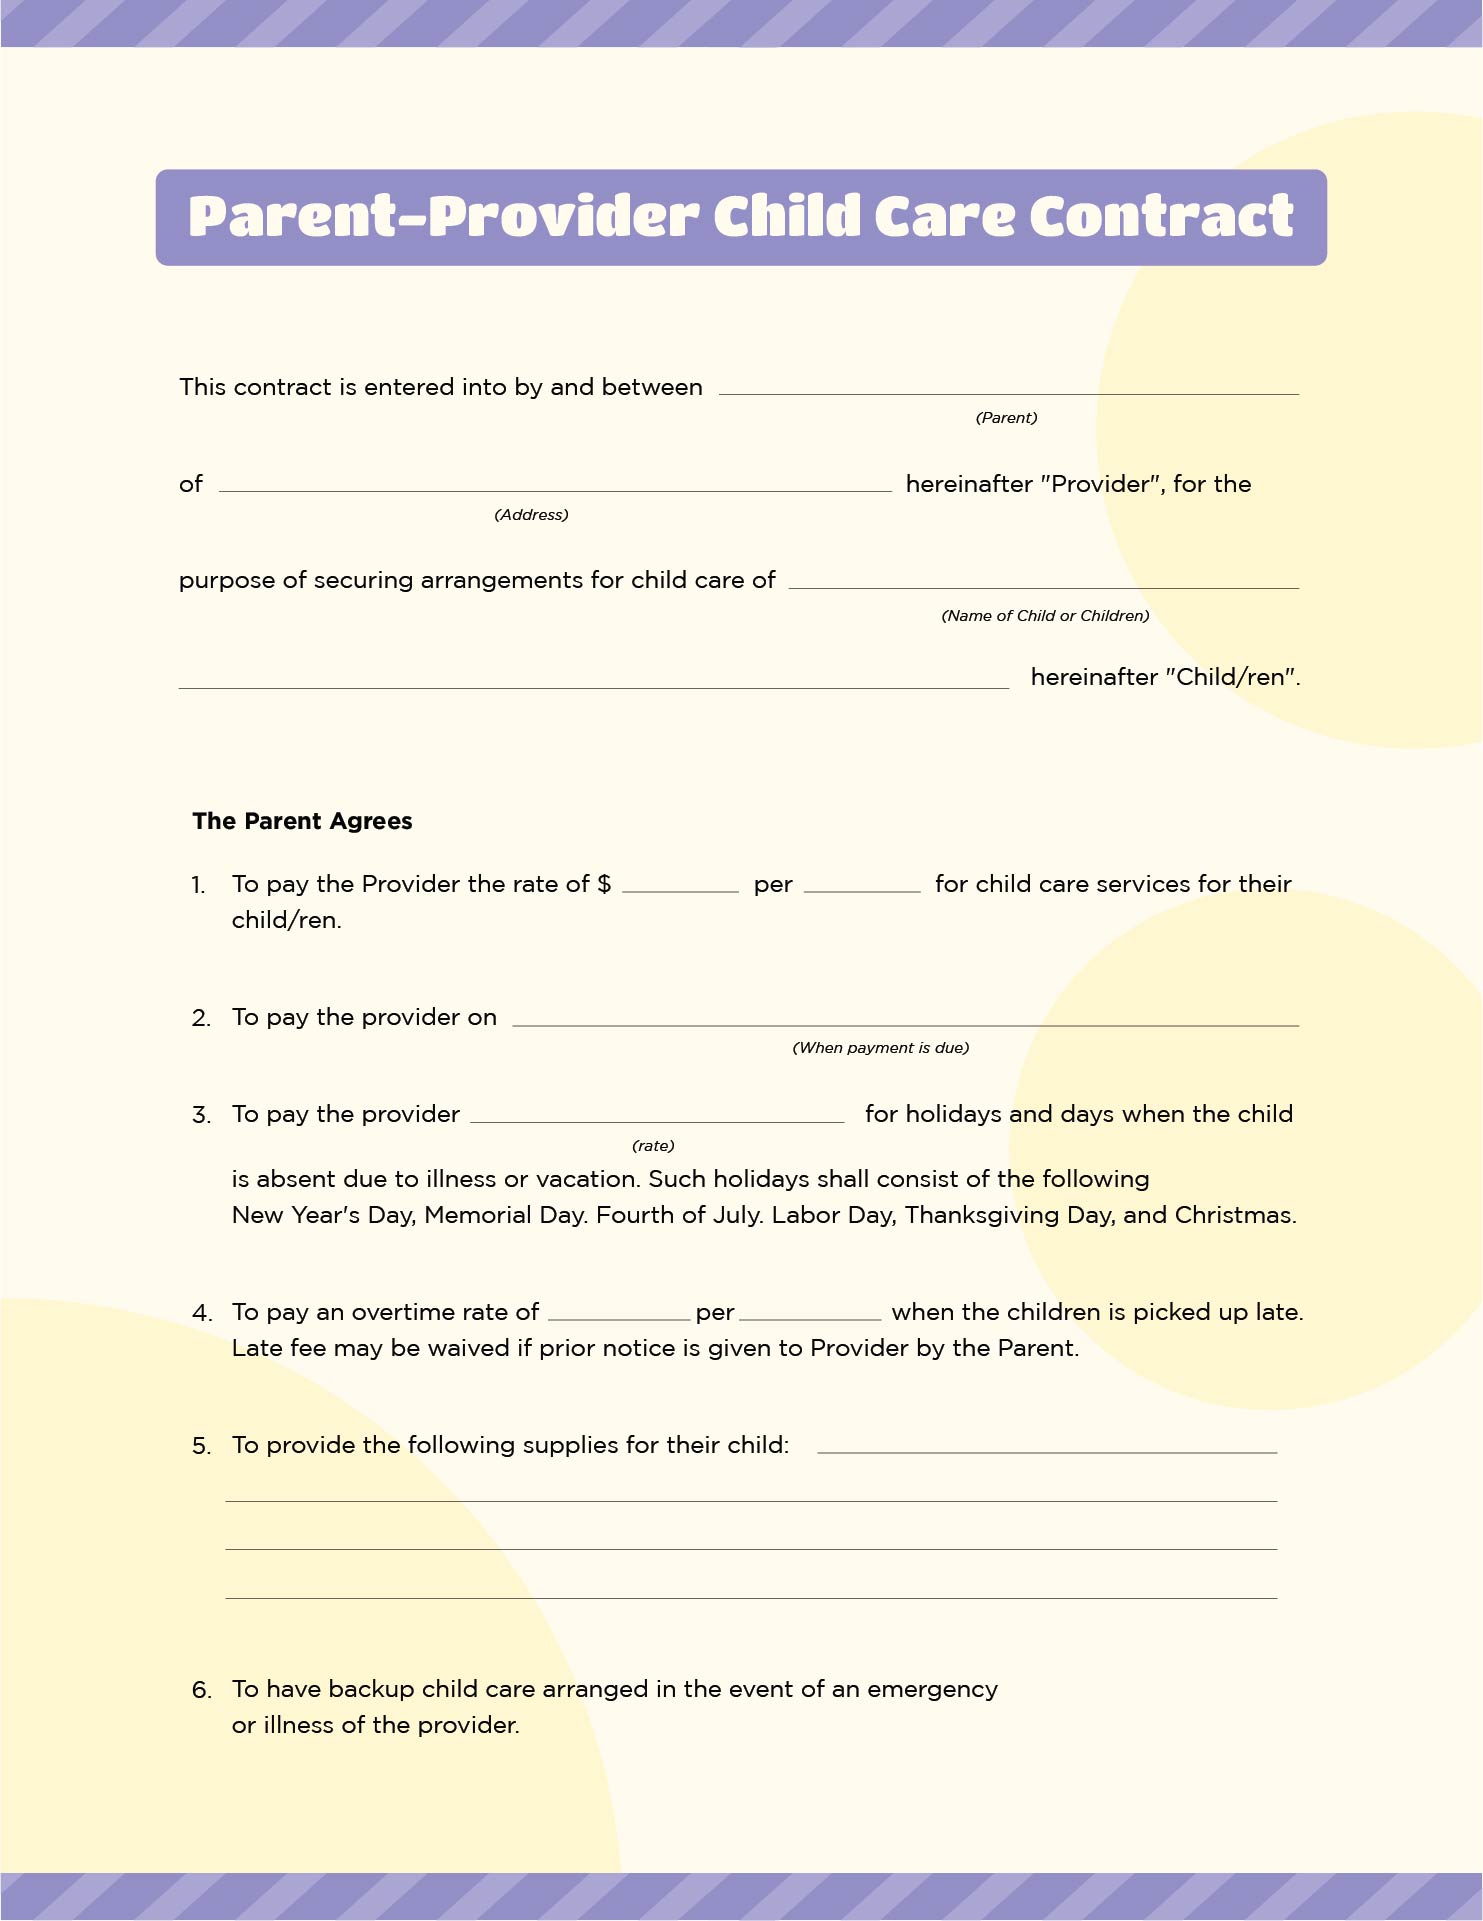 daycare-forms-printable-free-printable-forms-free-online